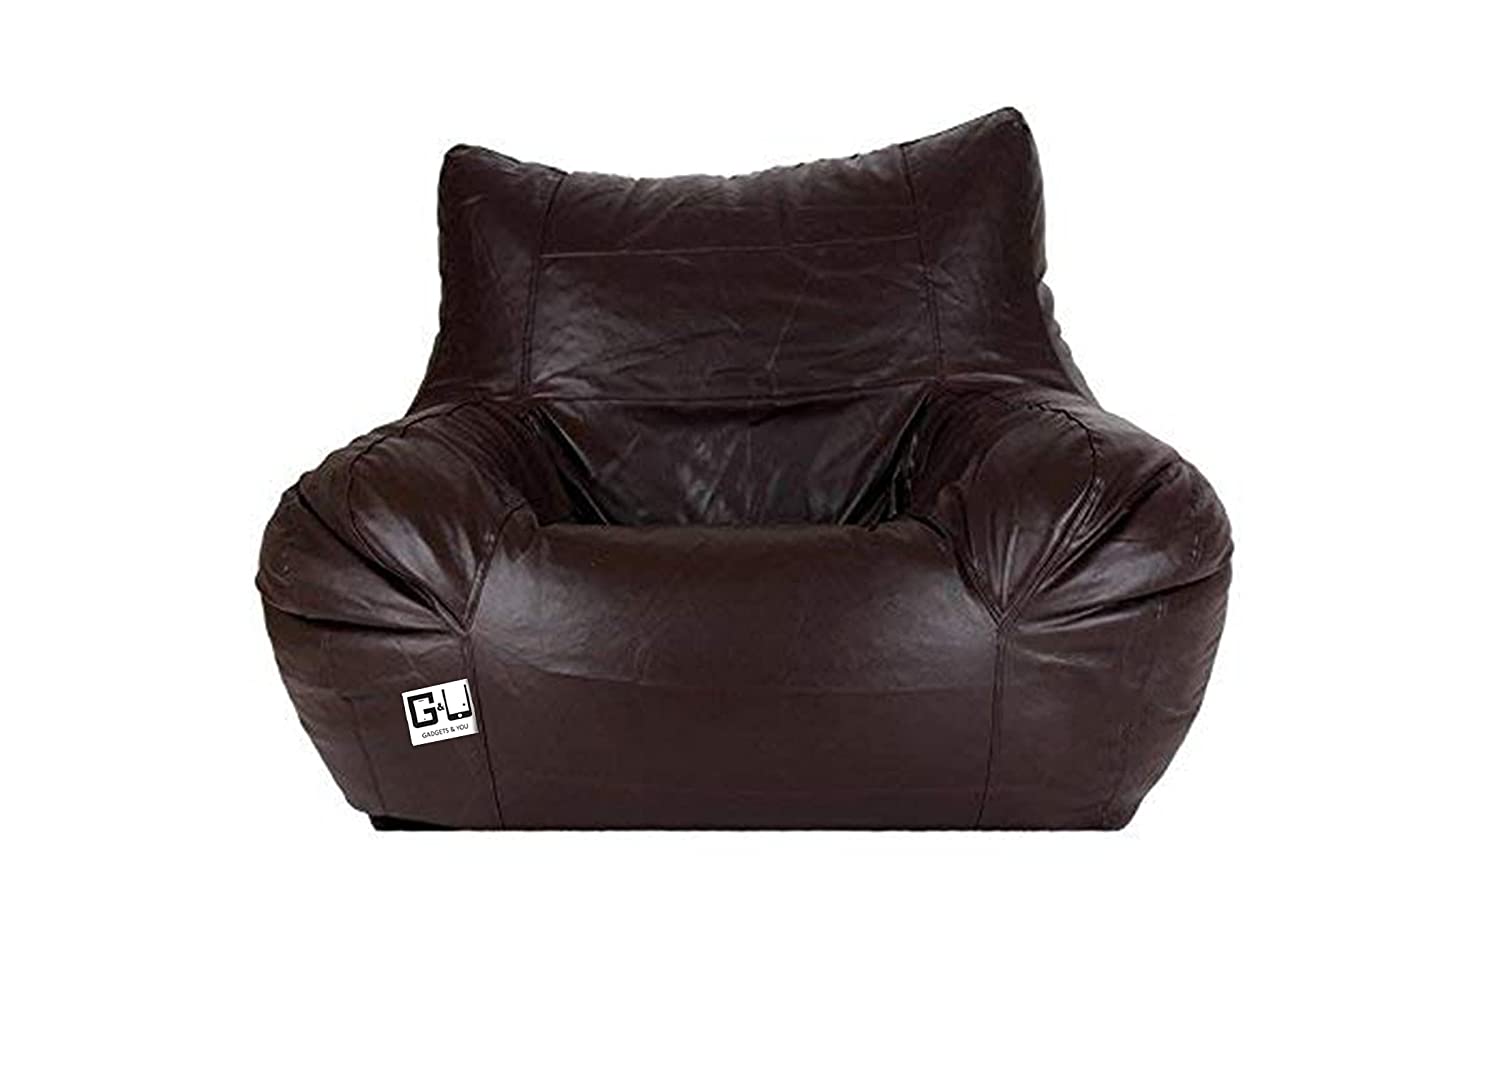 G&U Classy Arm Chair Bean Bags with Beans Filled